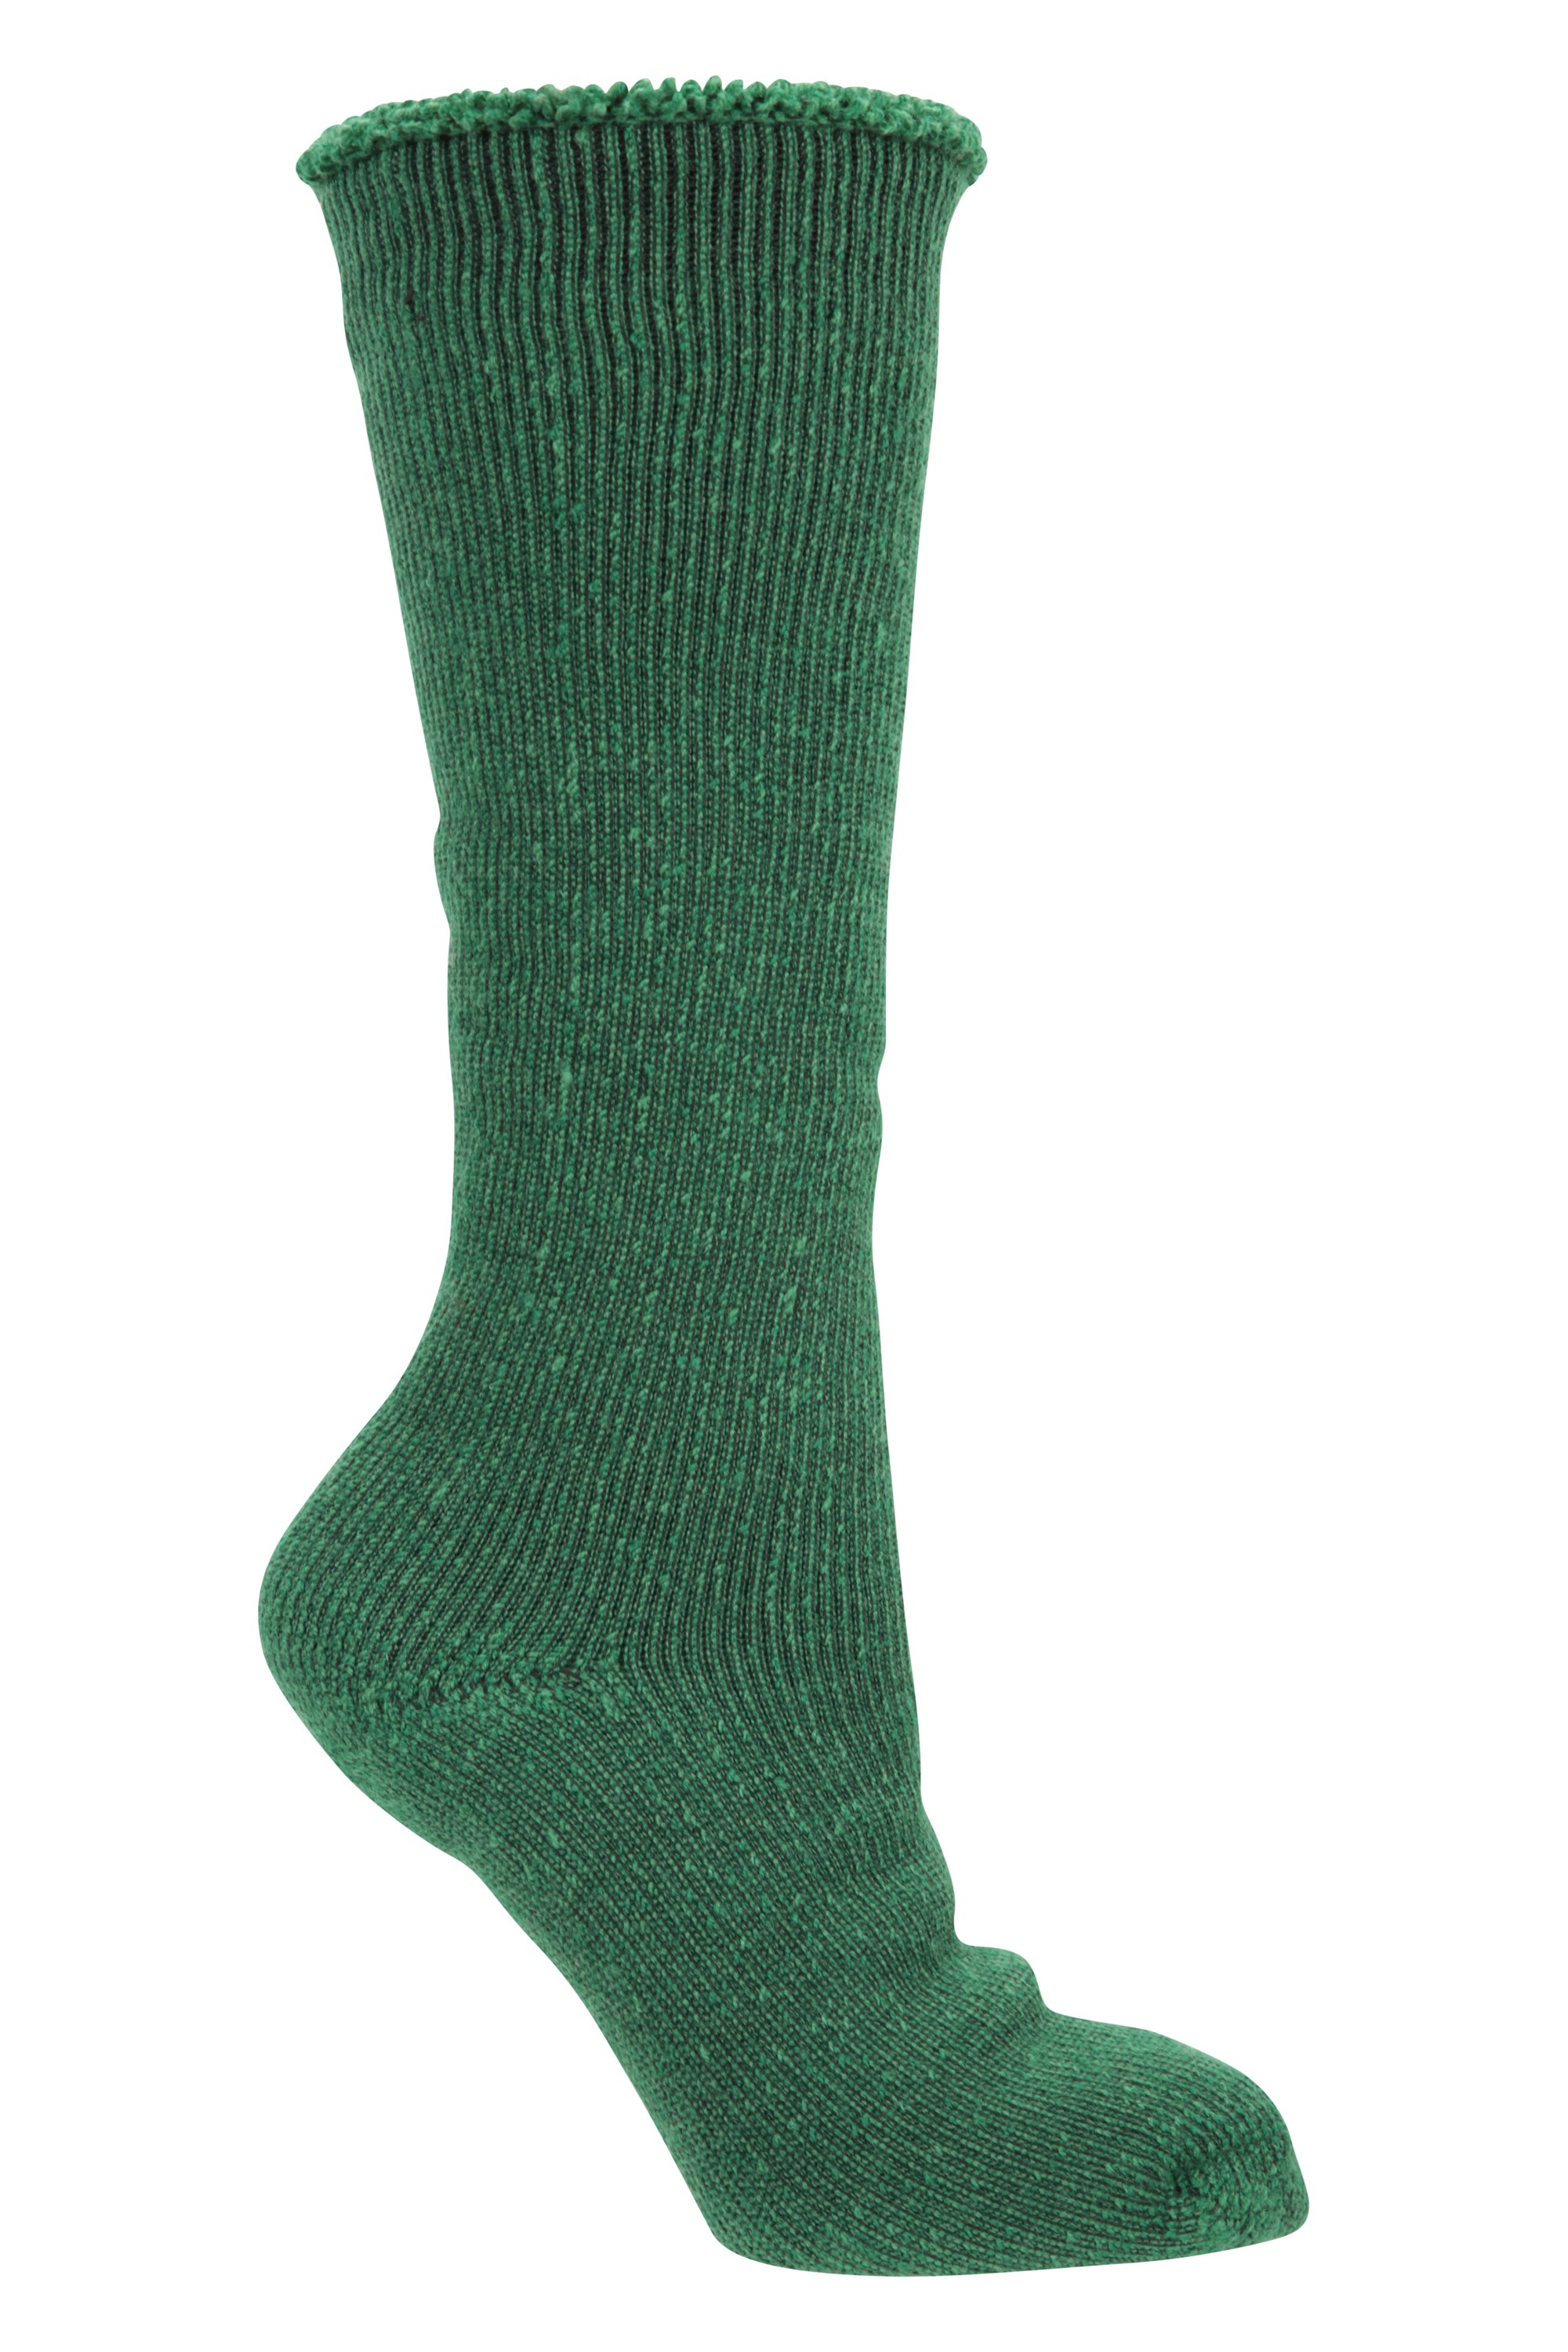 Mountain Warehouse Womens Socks Extra Thick Construction & Inner Brushed Lining 